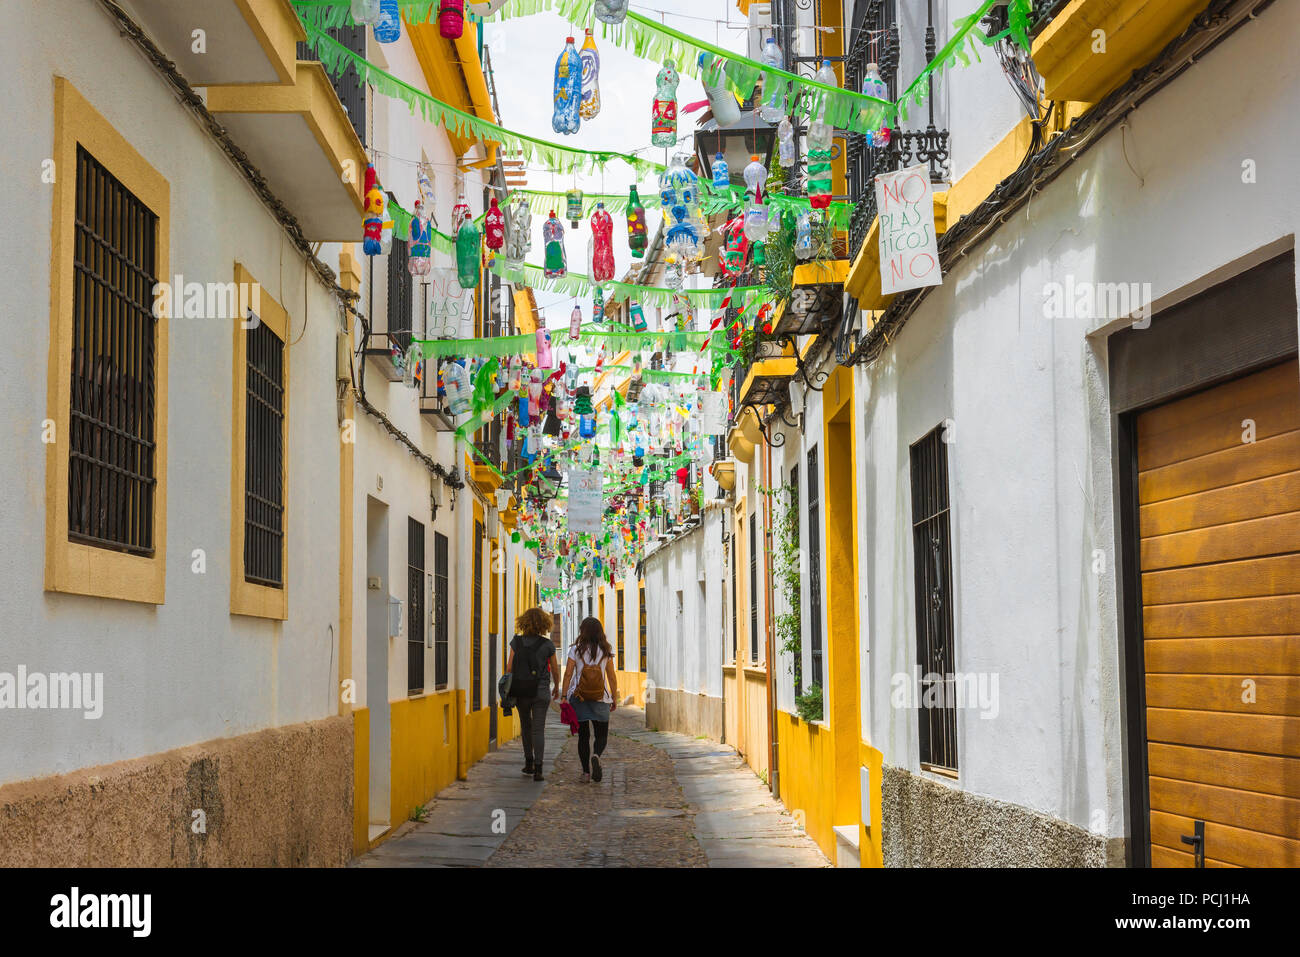 Plastic pollution, waste plastic bottles hanging above a street serve as a protest and warning against global pollution from plastics, Cordoba, Spain Stock Photo